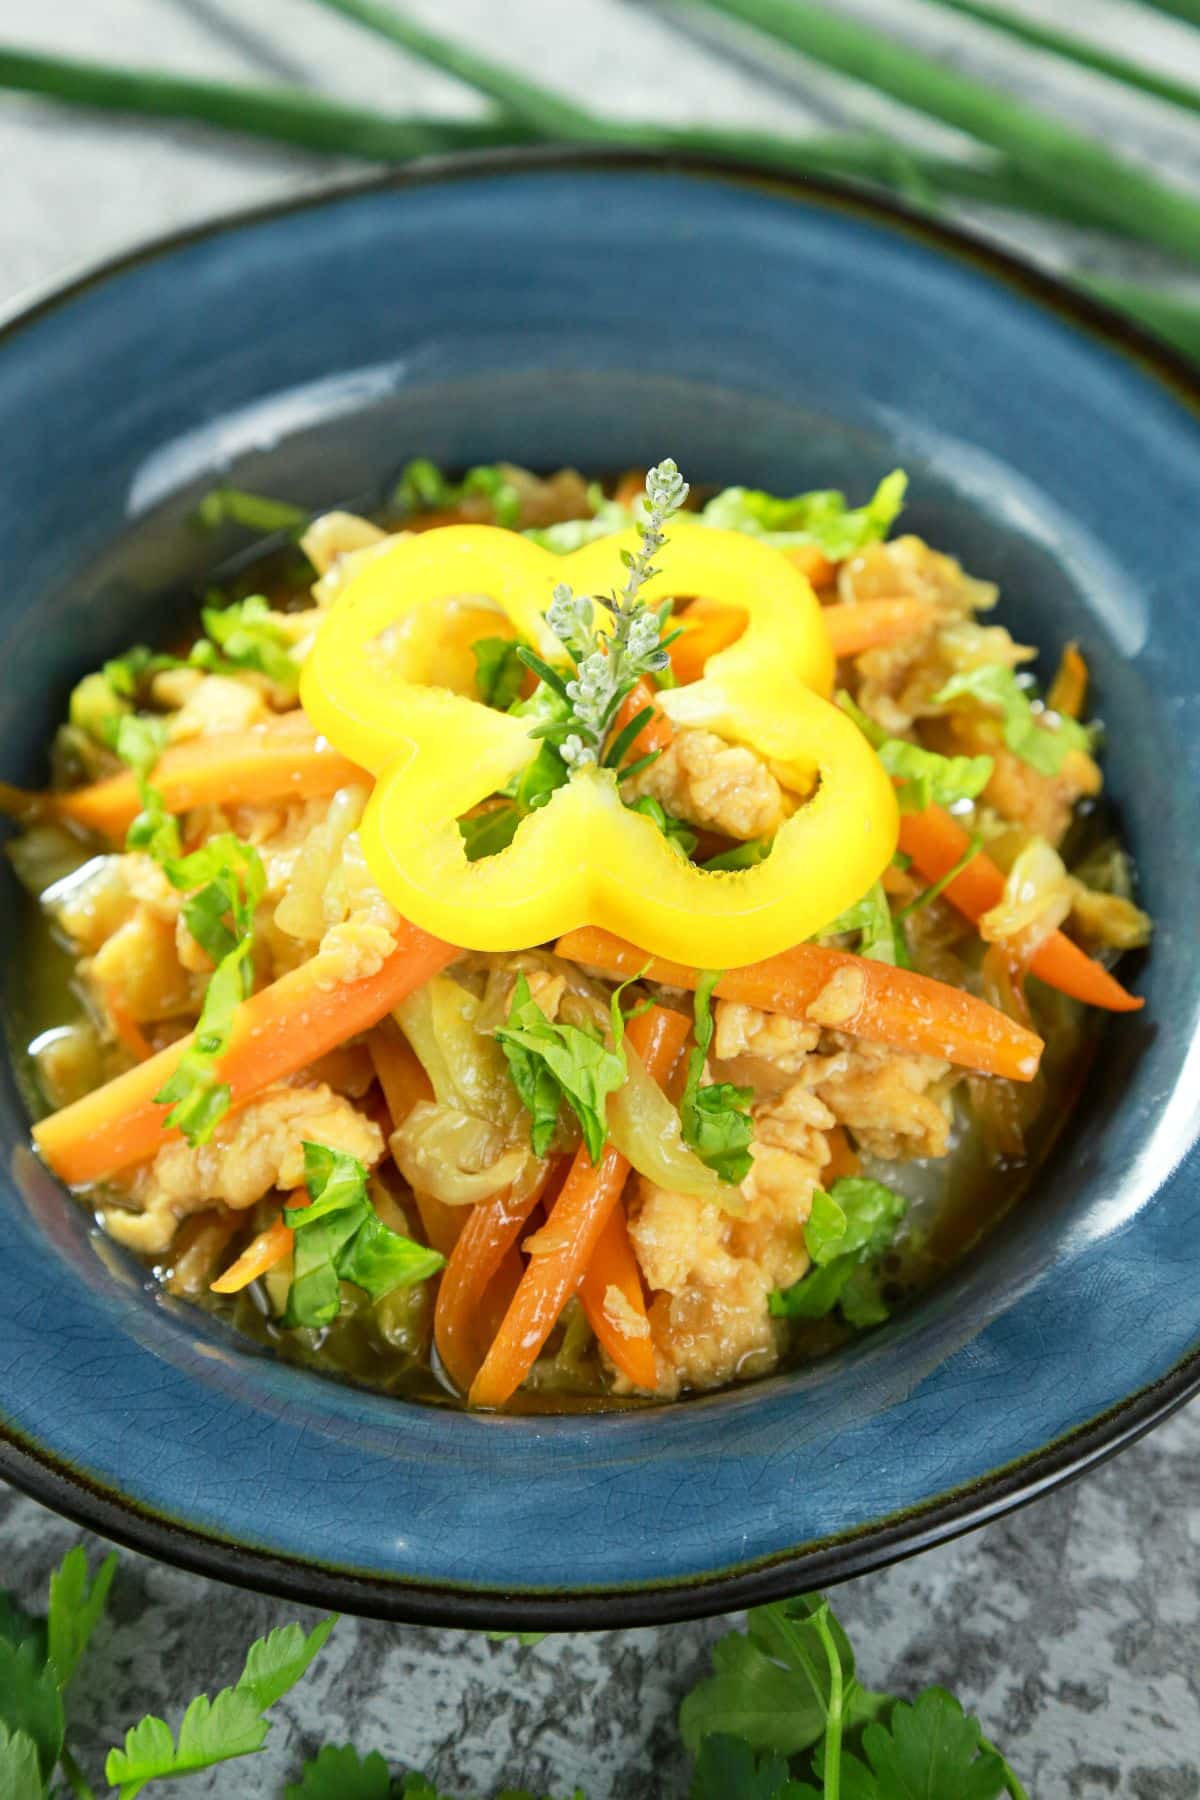 yellow bell pepper ring on top of cabbage with eggs stir fry in blue bowl